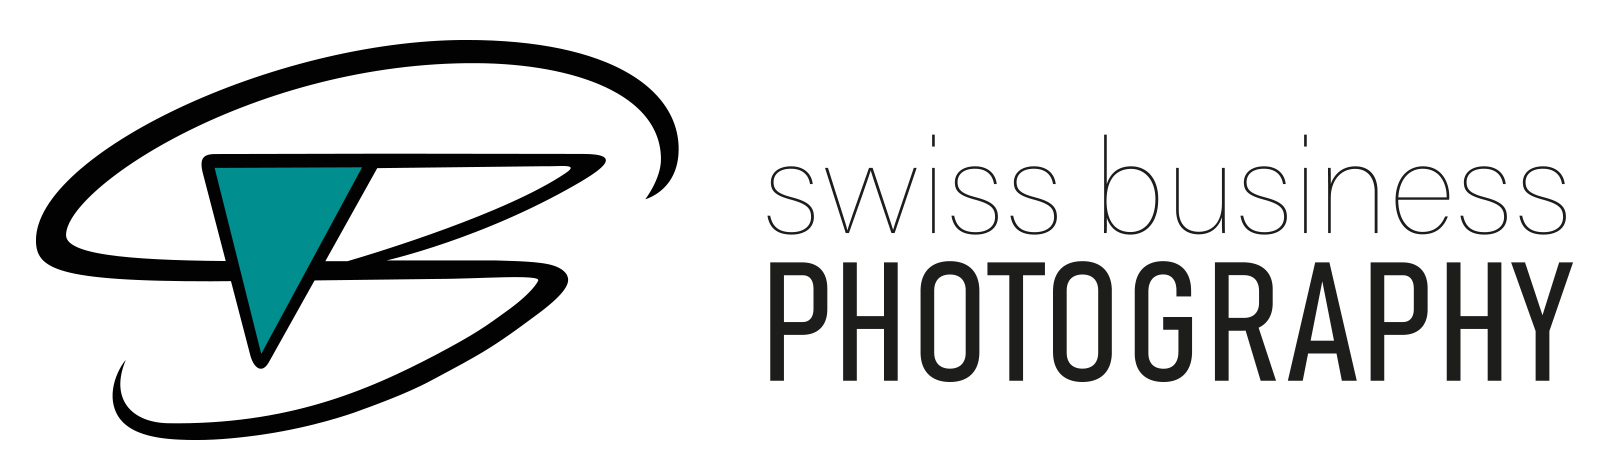 Swiss Business Photography by Margrith Widmer